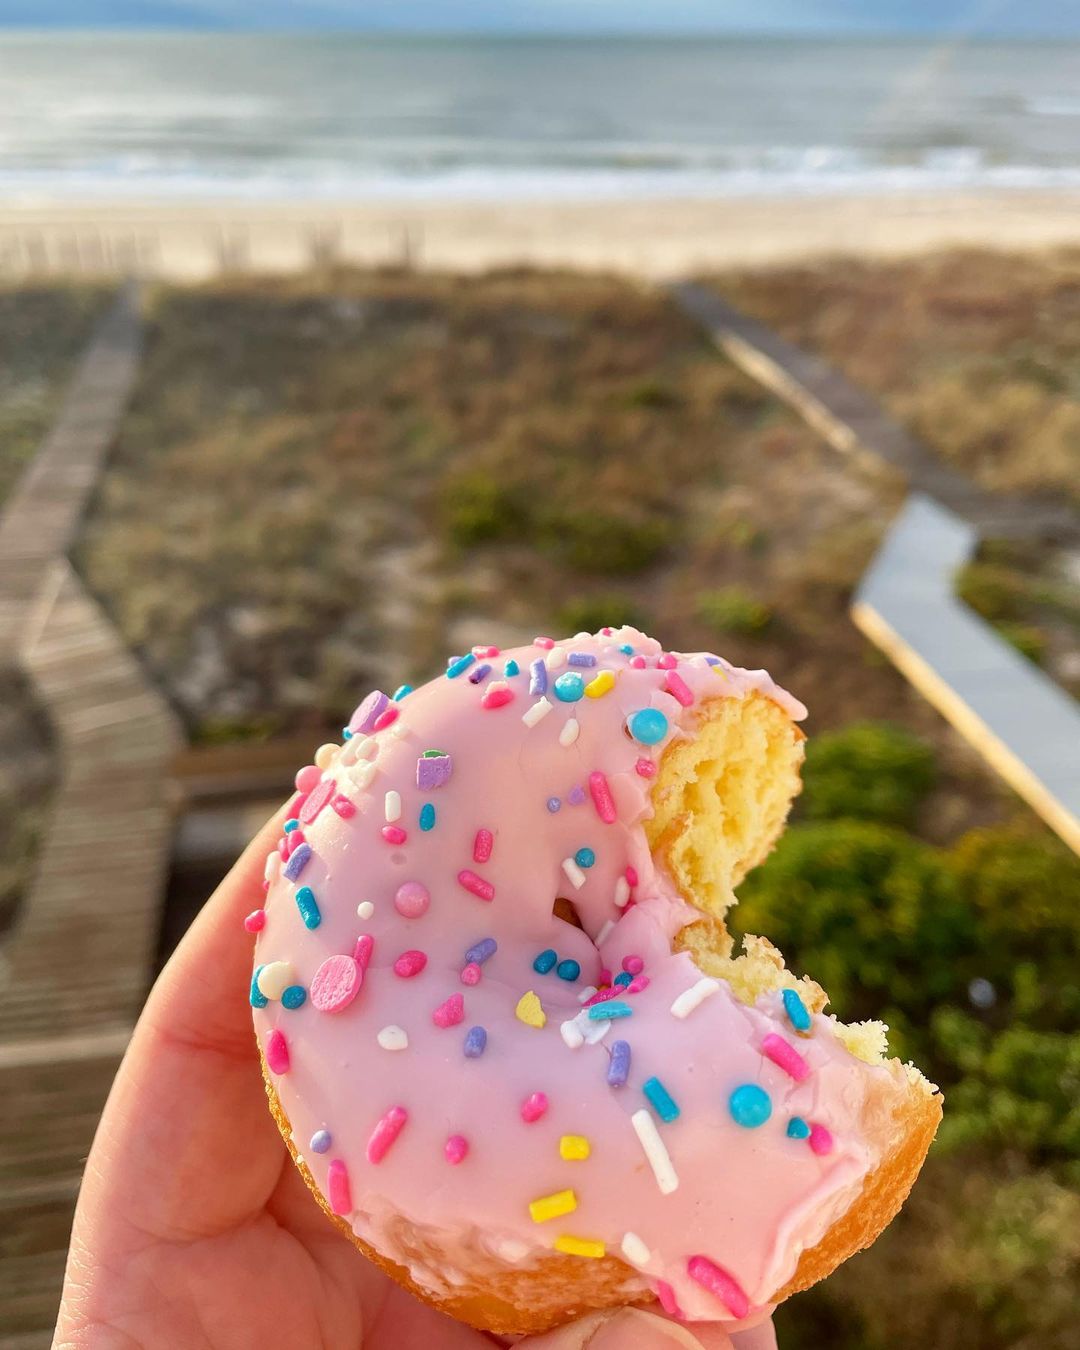 Donut with pink icing and sprinkles from Weber's Donut's on St. George Island FL